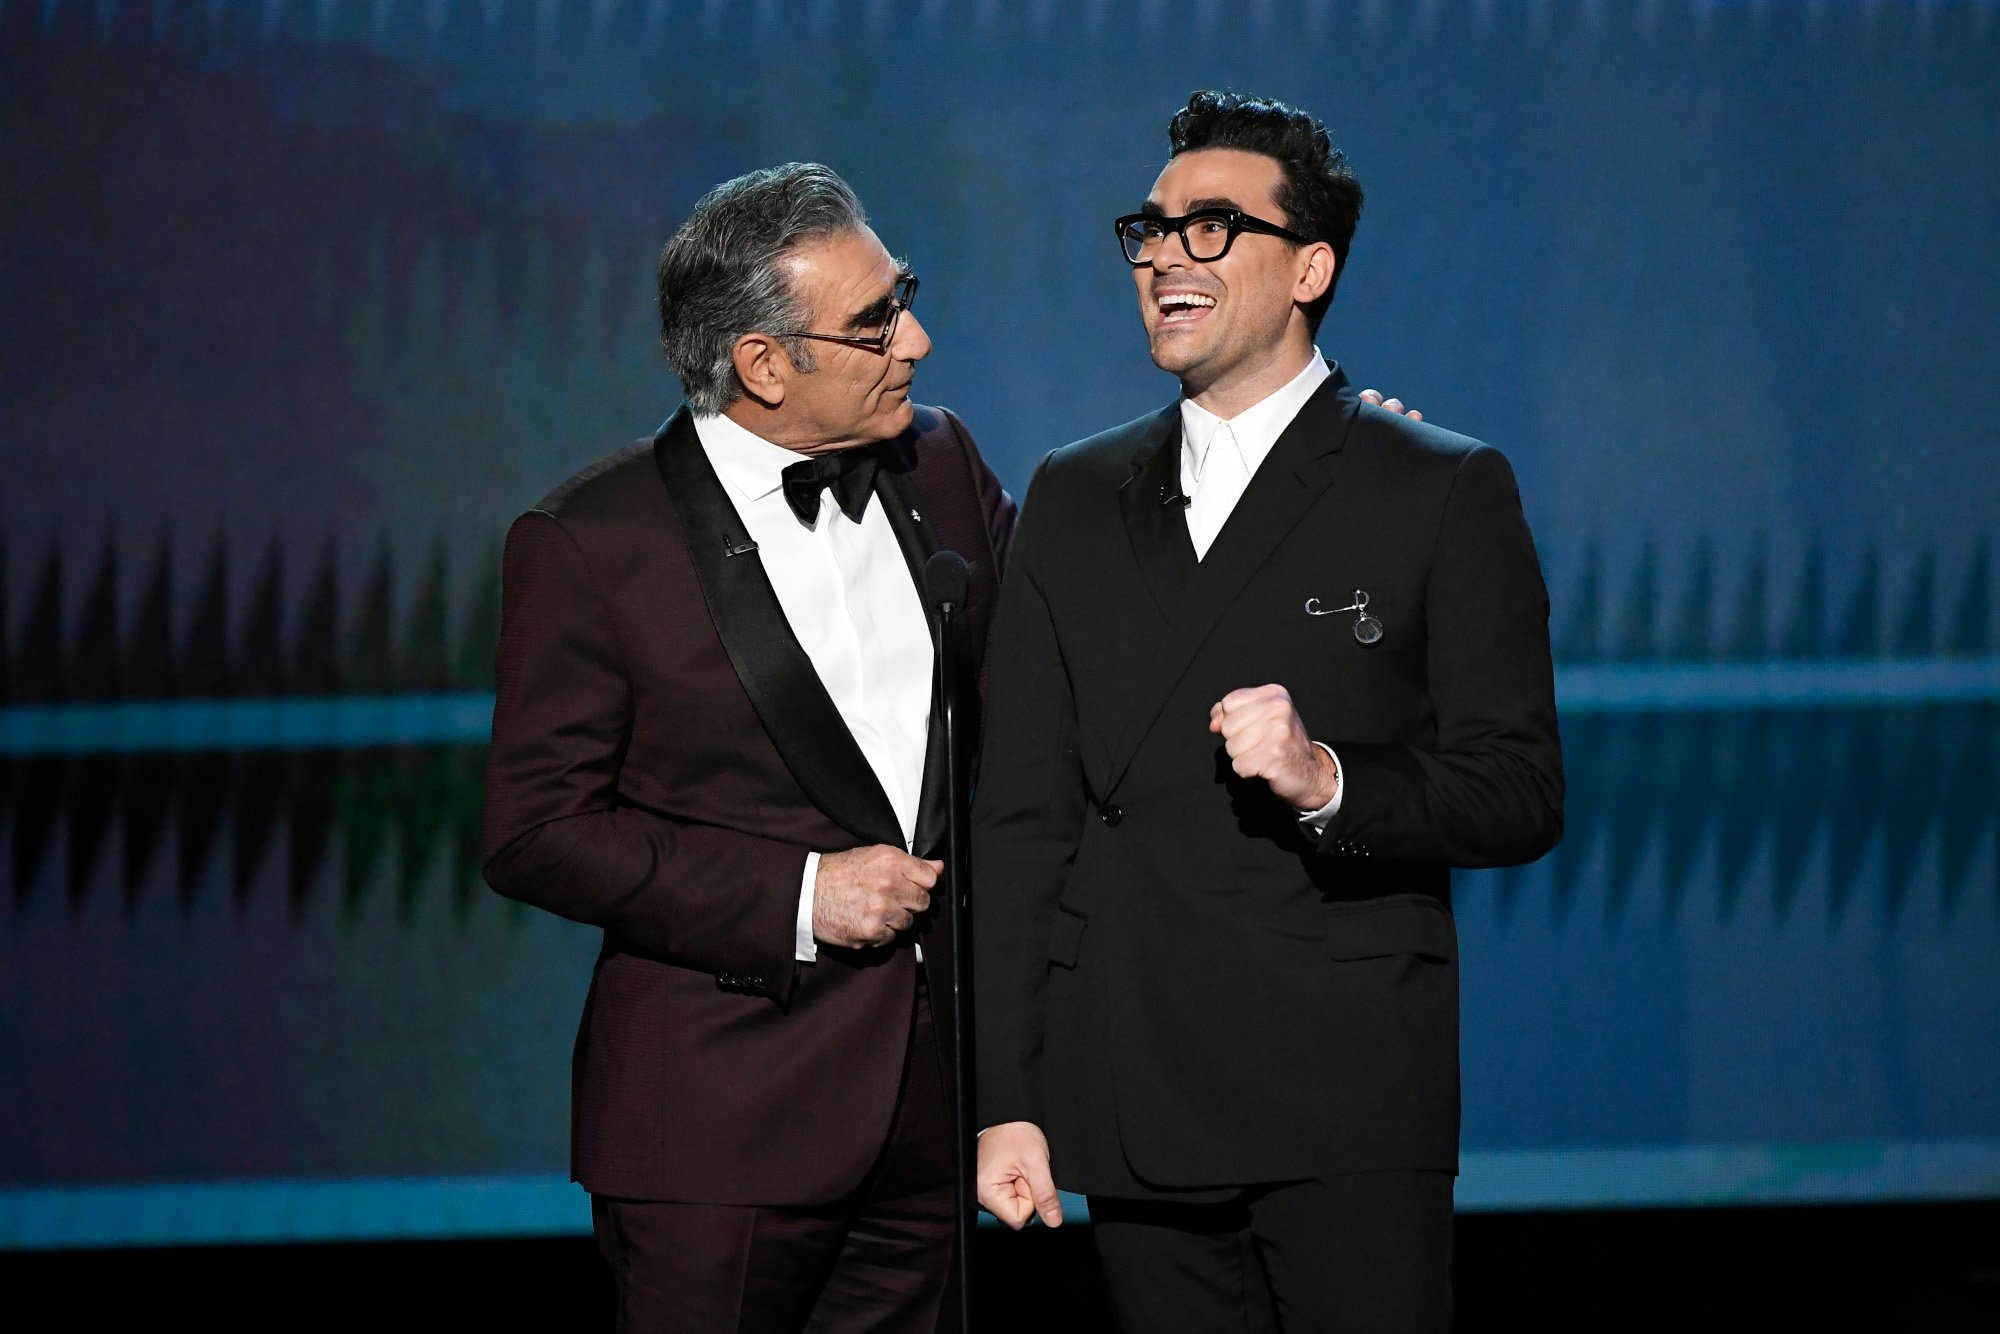 Schitts Creek stars Dan Levy and Eugene Levy at an awards show. Eugene, right, has his arm around his son and is looking at him. Dan is holding an envelope and laughing.